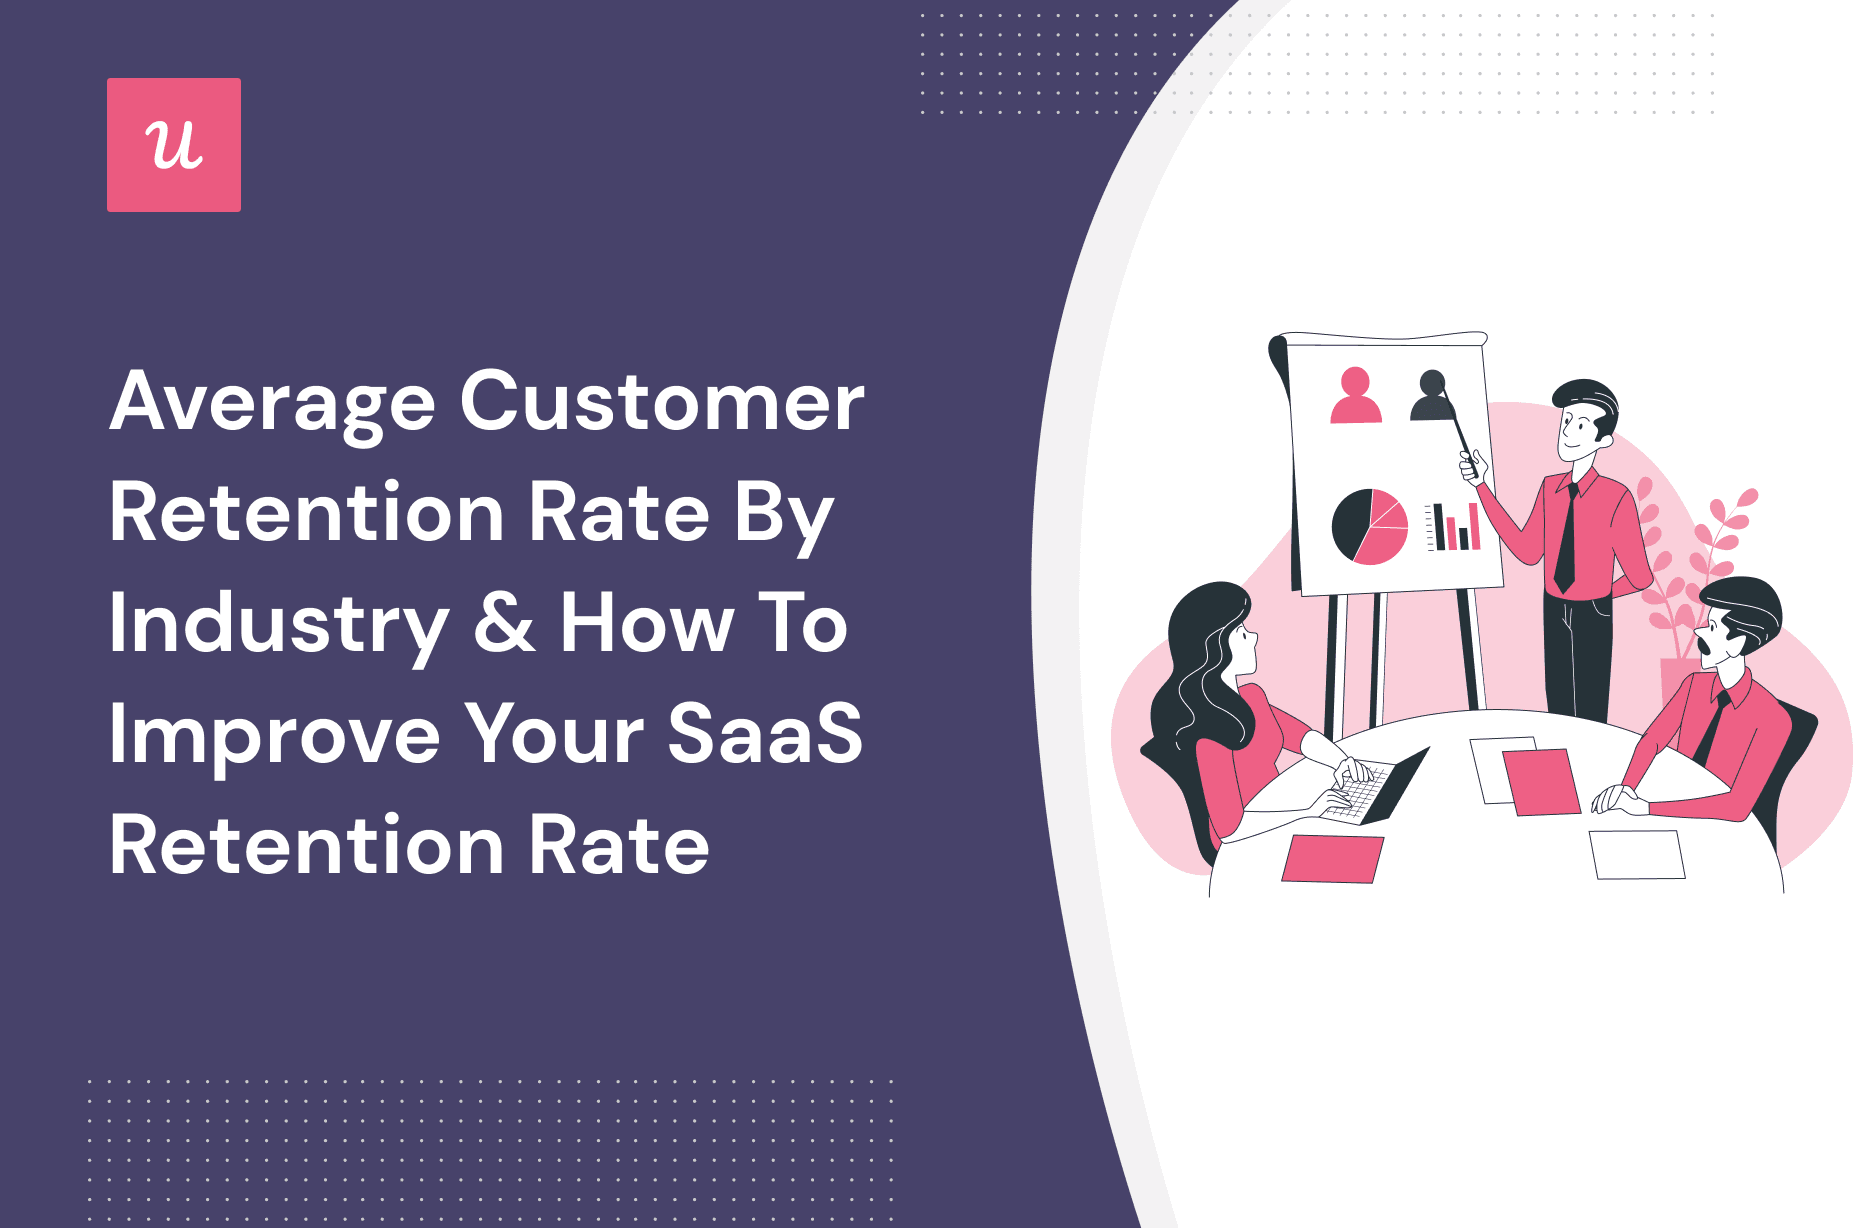 Average Customer Retention Rate By Industry & How to Improve Your SaaS Retention Rate cover